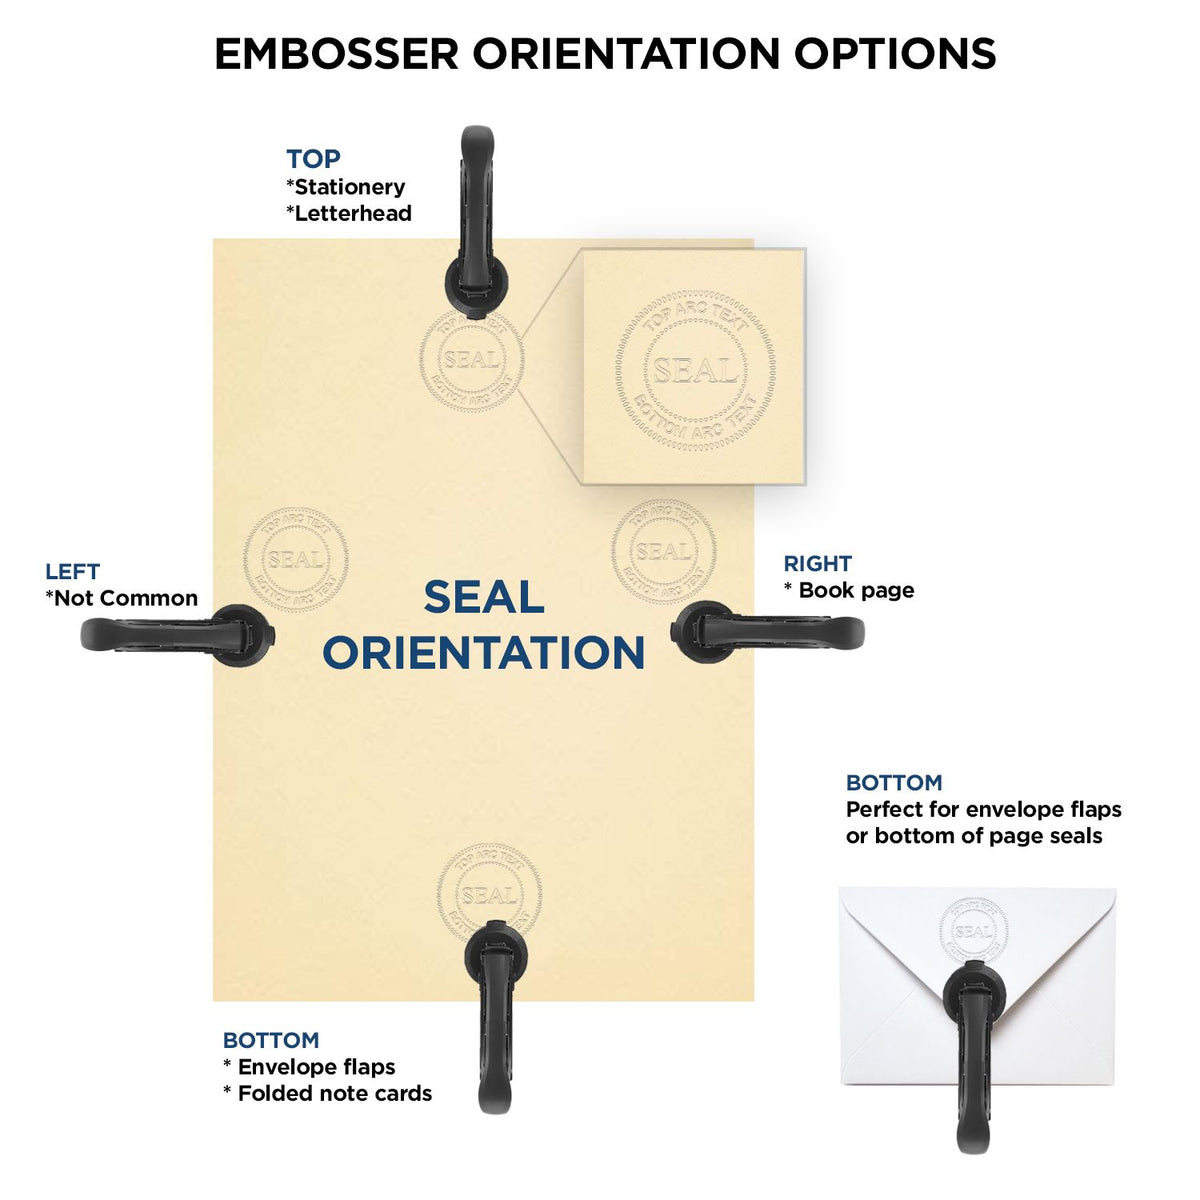 An infographic for the Soft New Mexico Professional Engineer Seal showing embosser orientation, this is showing examples of a top, bottom, right and left insert.